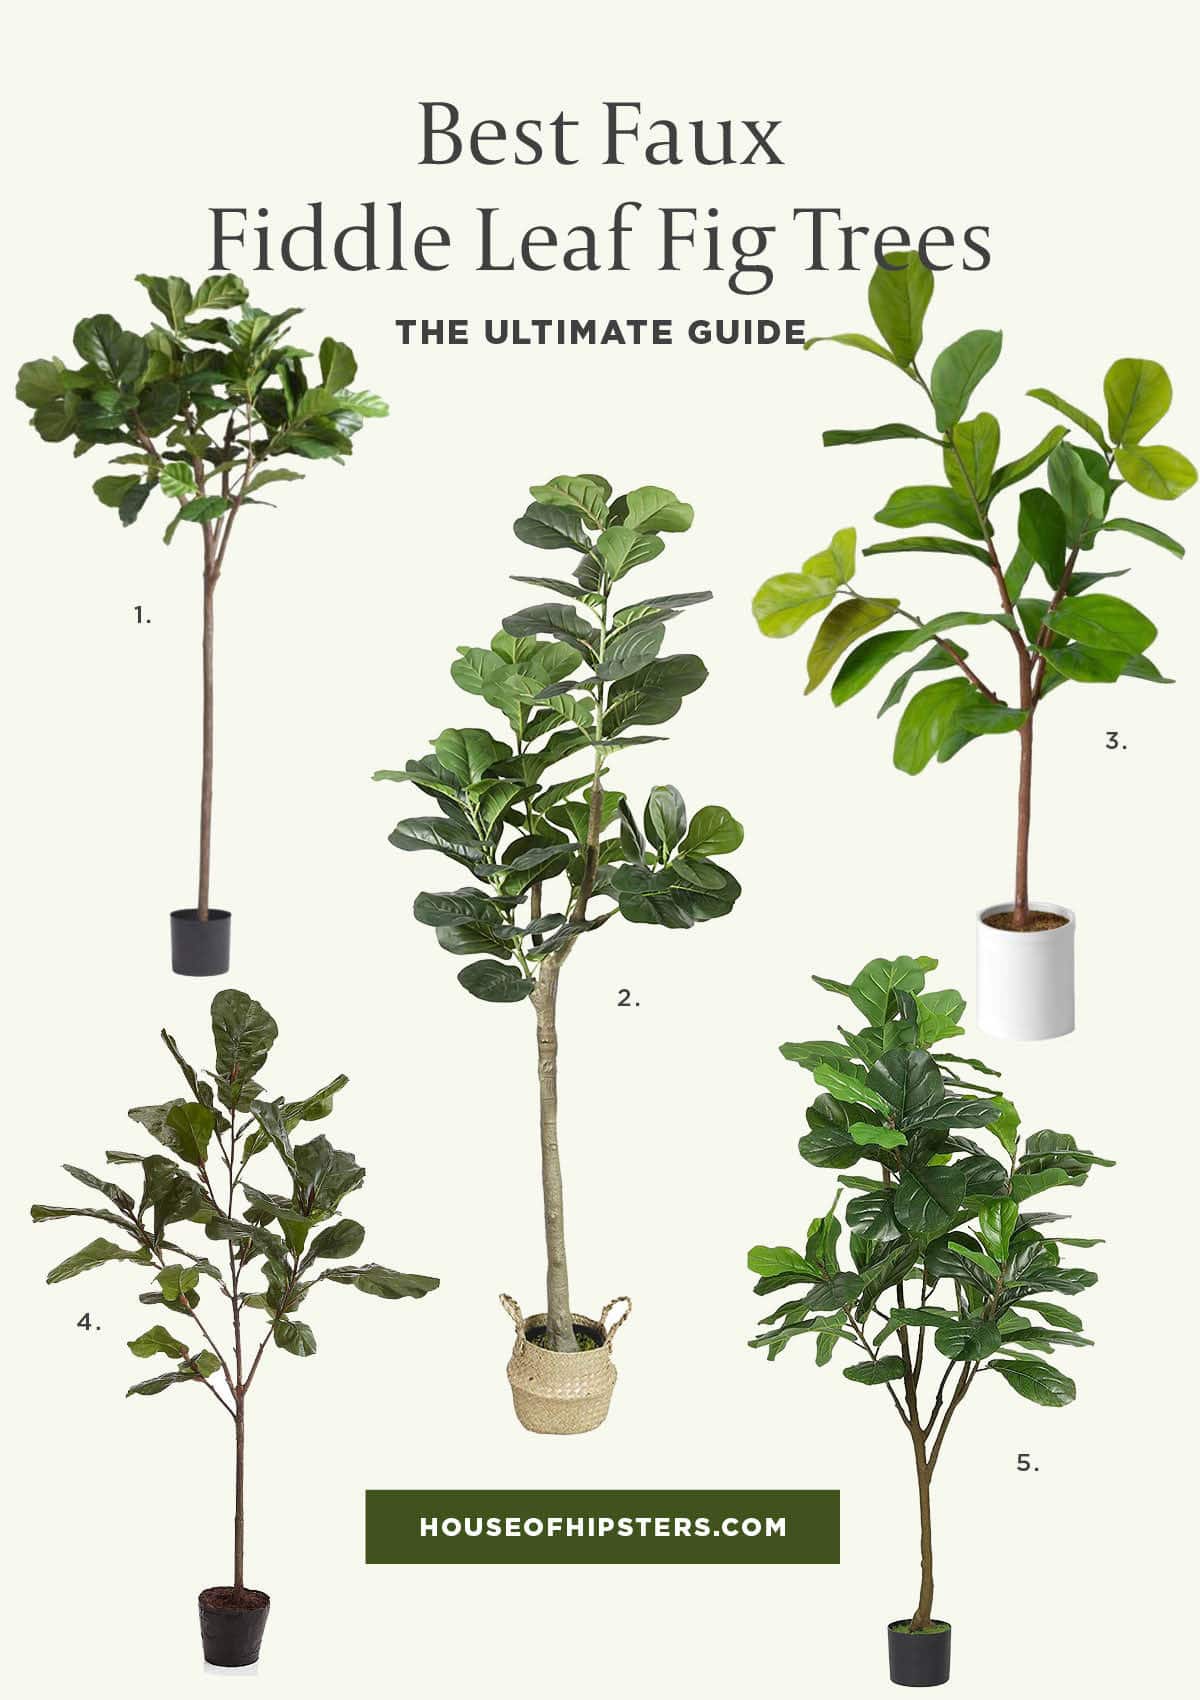 15 Best Faux Fiddle Leaf Fig Trees